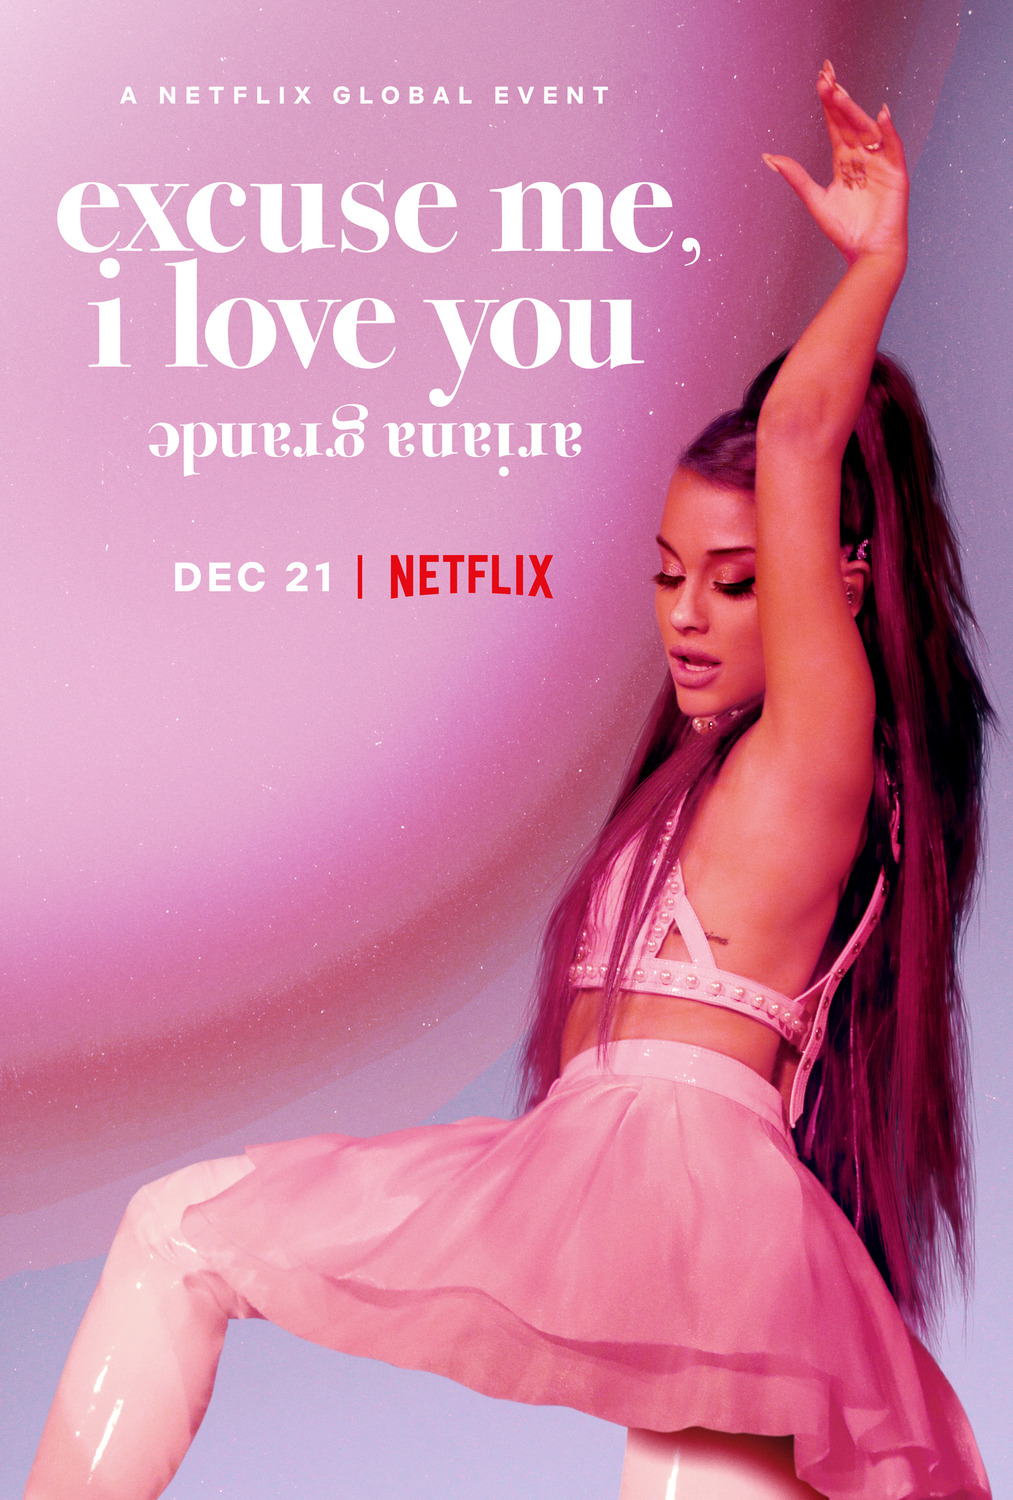 Extra Large TV Poster Image for Ariana Grande: Excuse Me, I Love You 